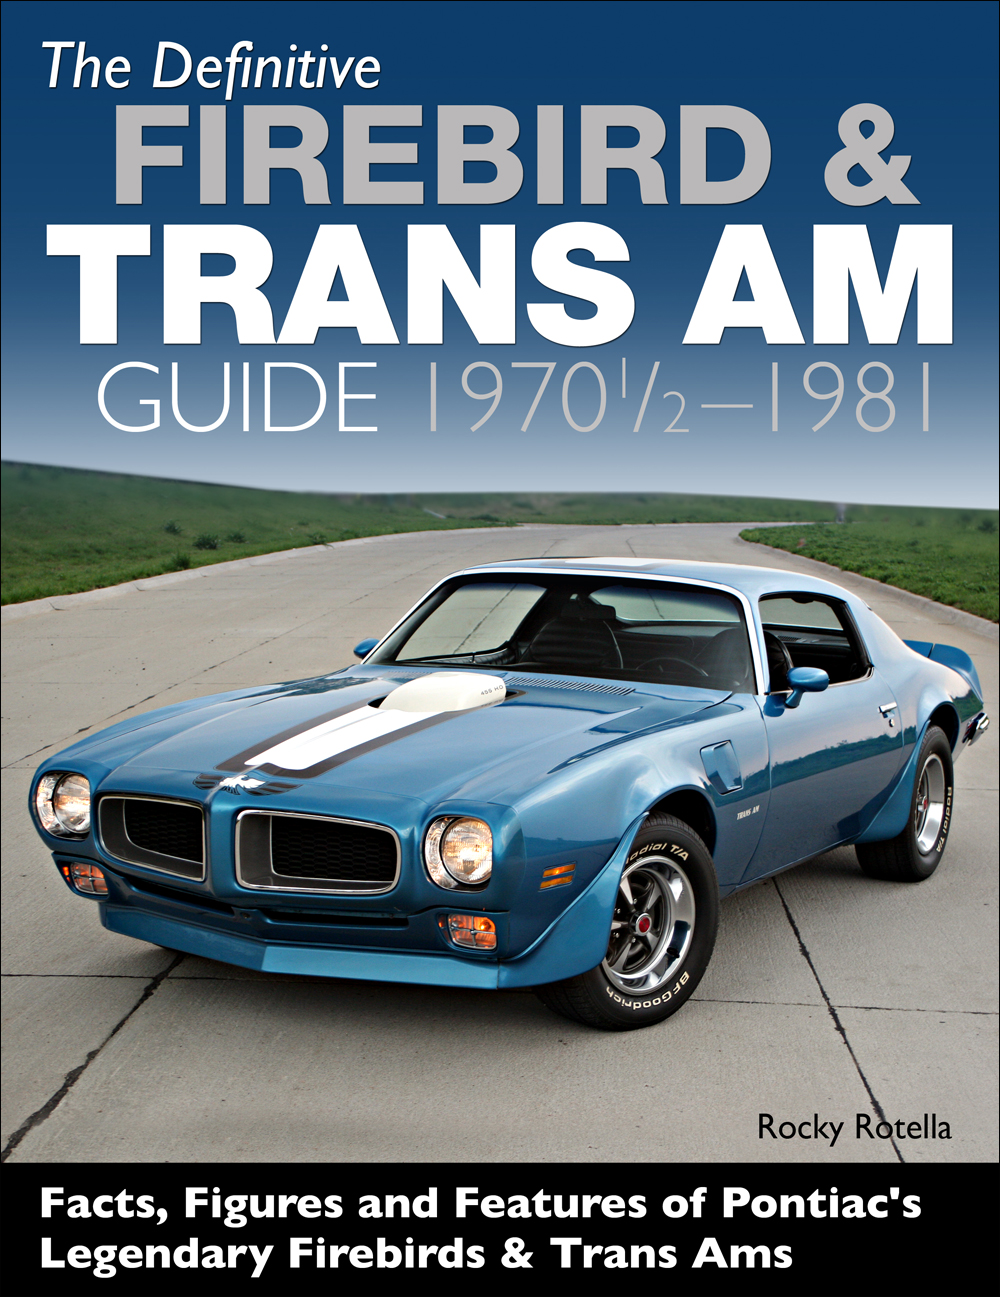 1970.5-1981 Definitive Firebird & Trans Am Guide: Facts, Figures and Features